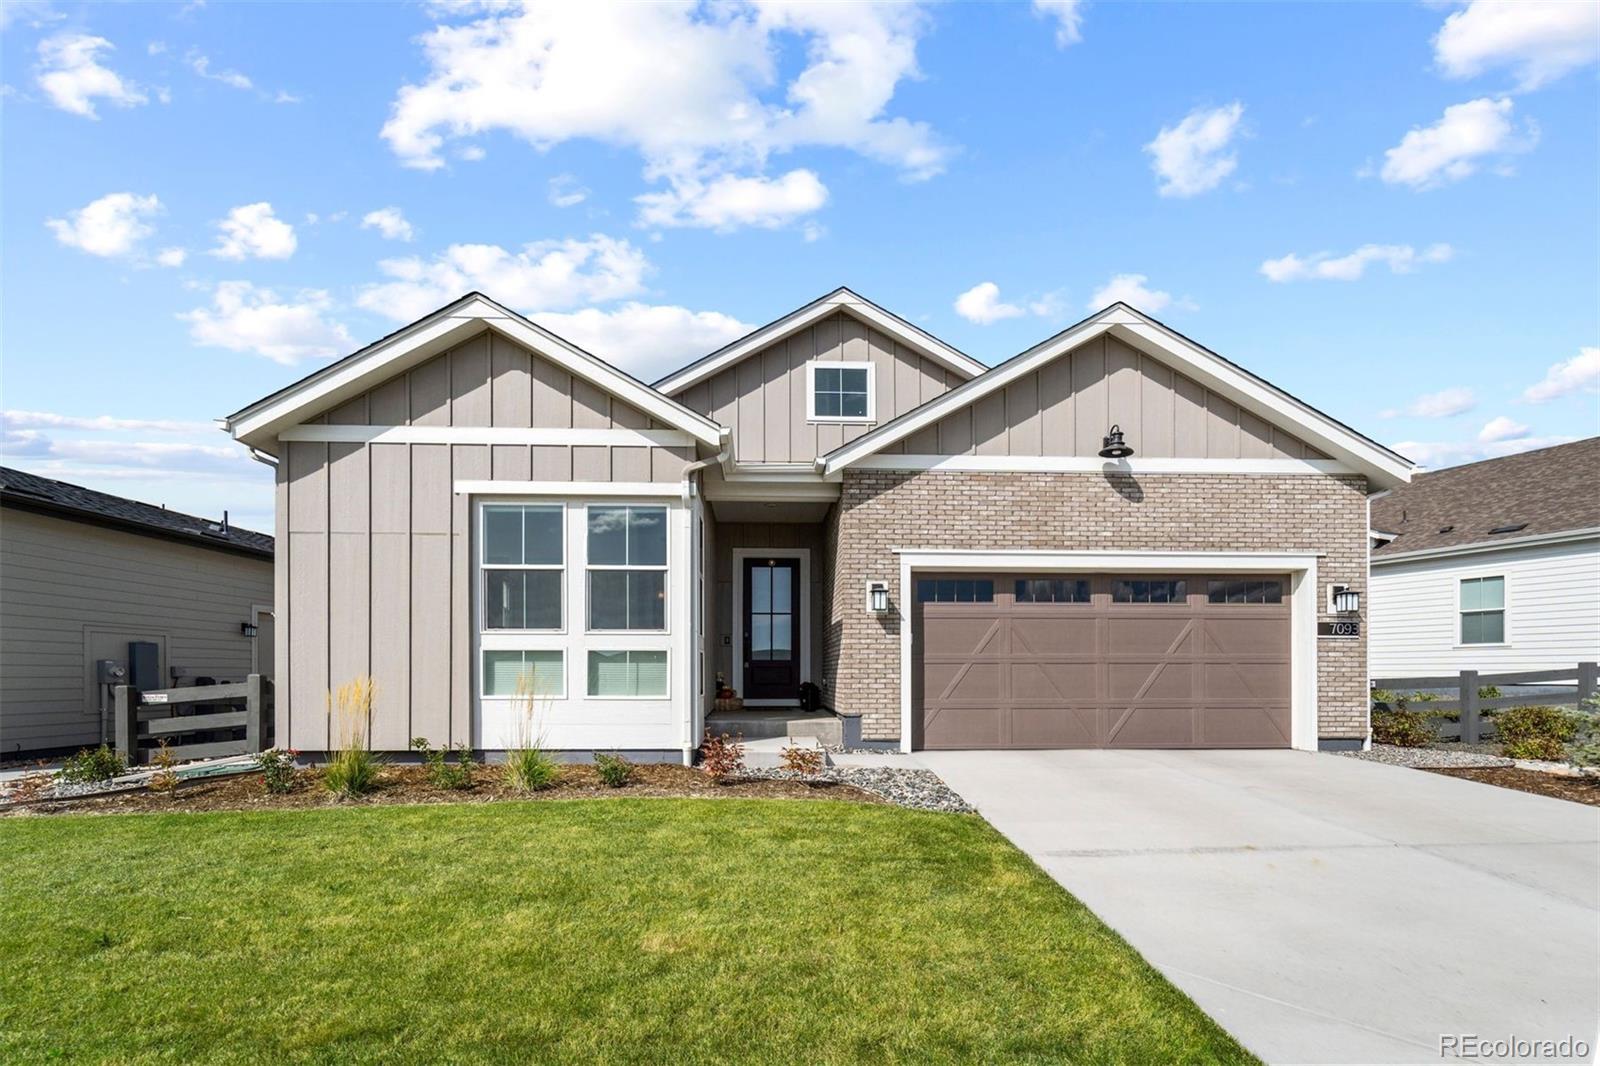 Report Image for 7093  Canyonpoint Road,Castle Pines, Colorado